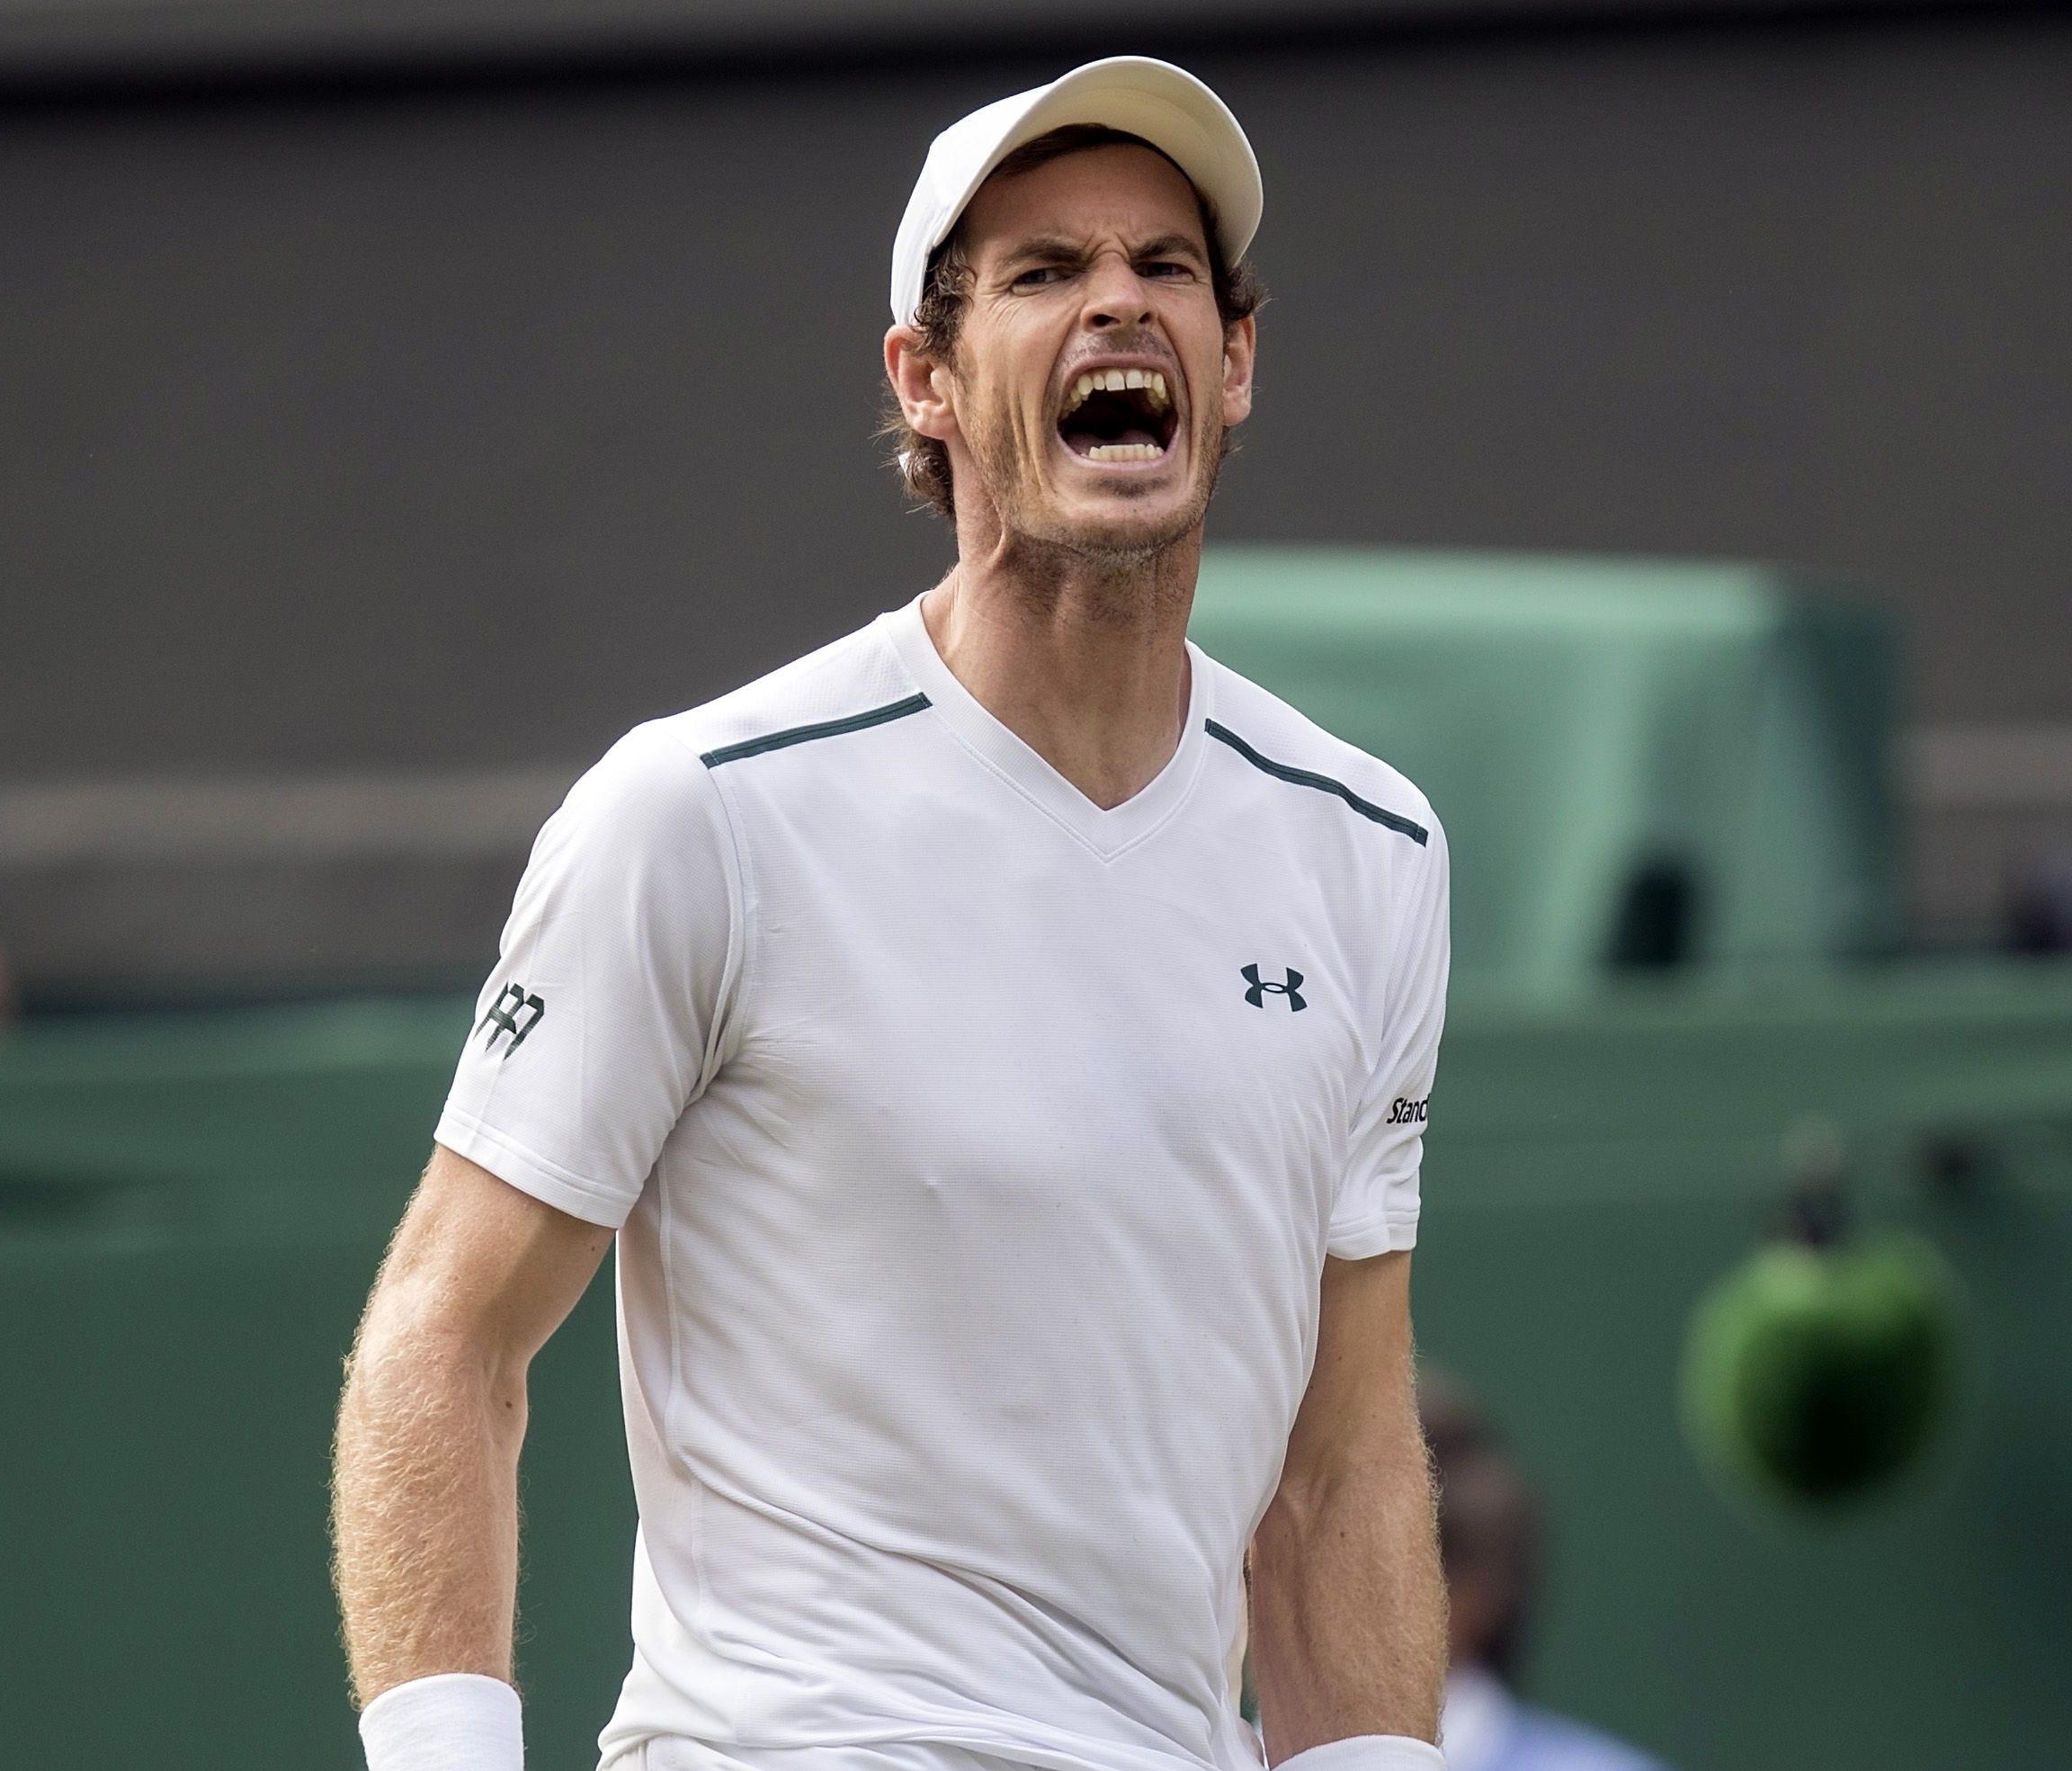 Andy Murray (GBR) reacts during his match against Benoit Paire (FRA) on day seven at the All England Lawn Tennis and Croquet Club.